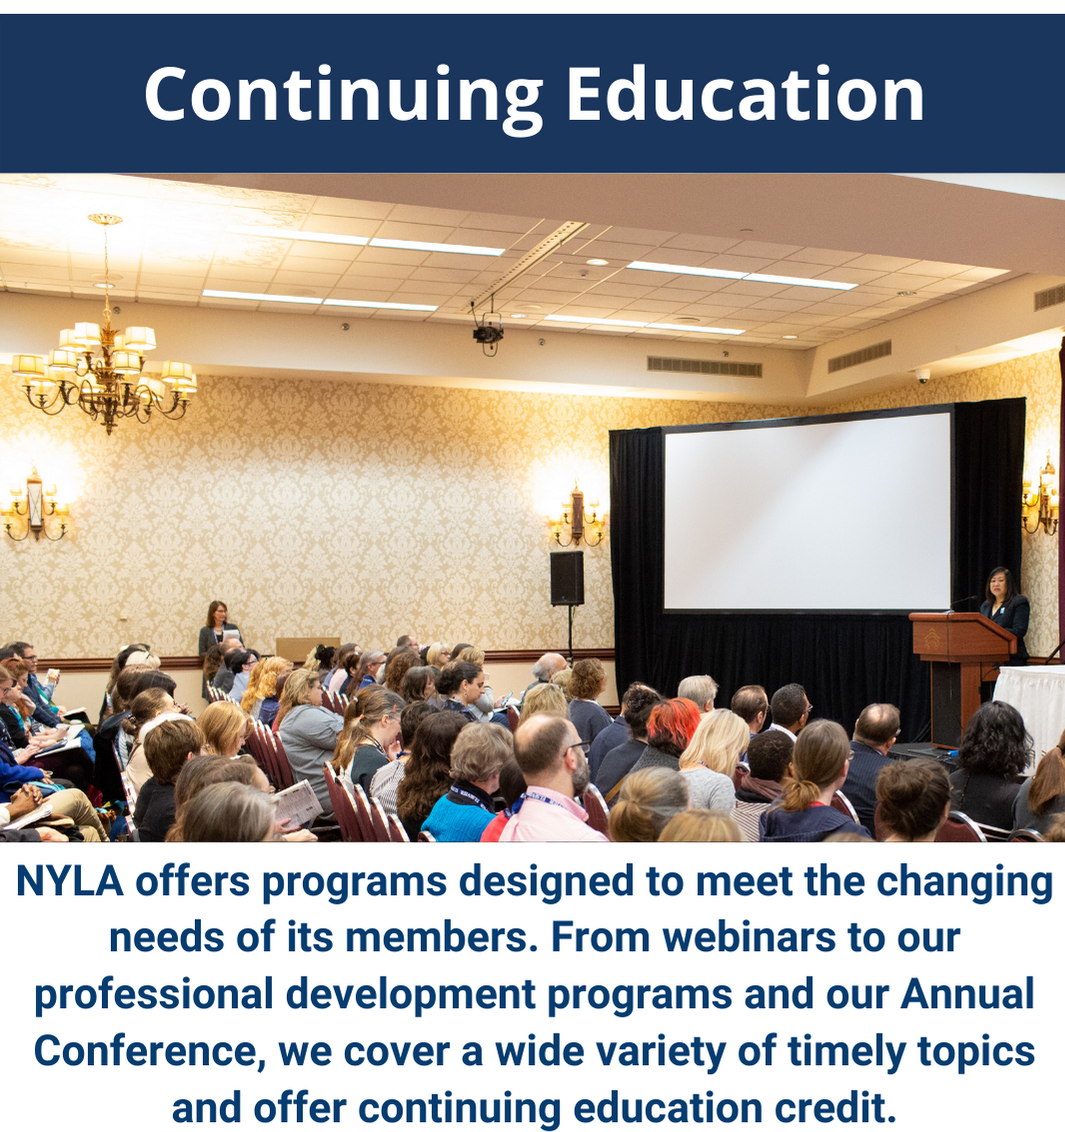 Continuing Education - NYLA offers programs designed to meet the changing needs of its members. From webinars to our professional development programs and our Annual Conference, we cover a wide variety of timely topics and offer continuing education credit.